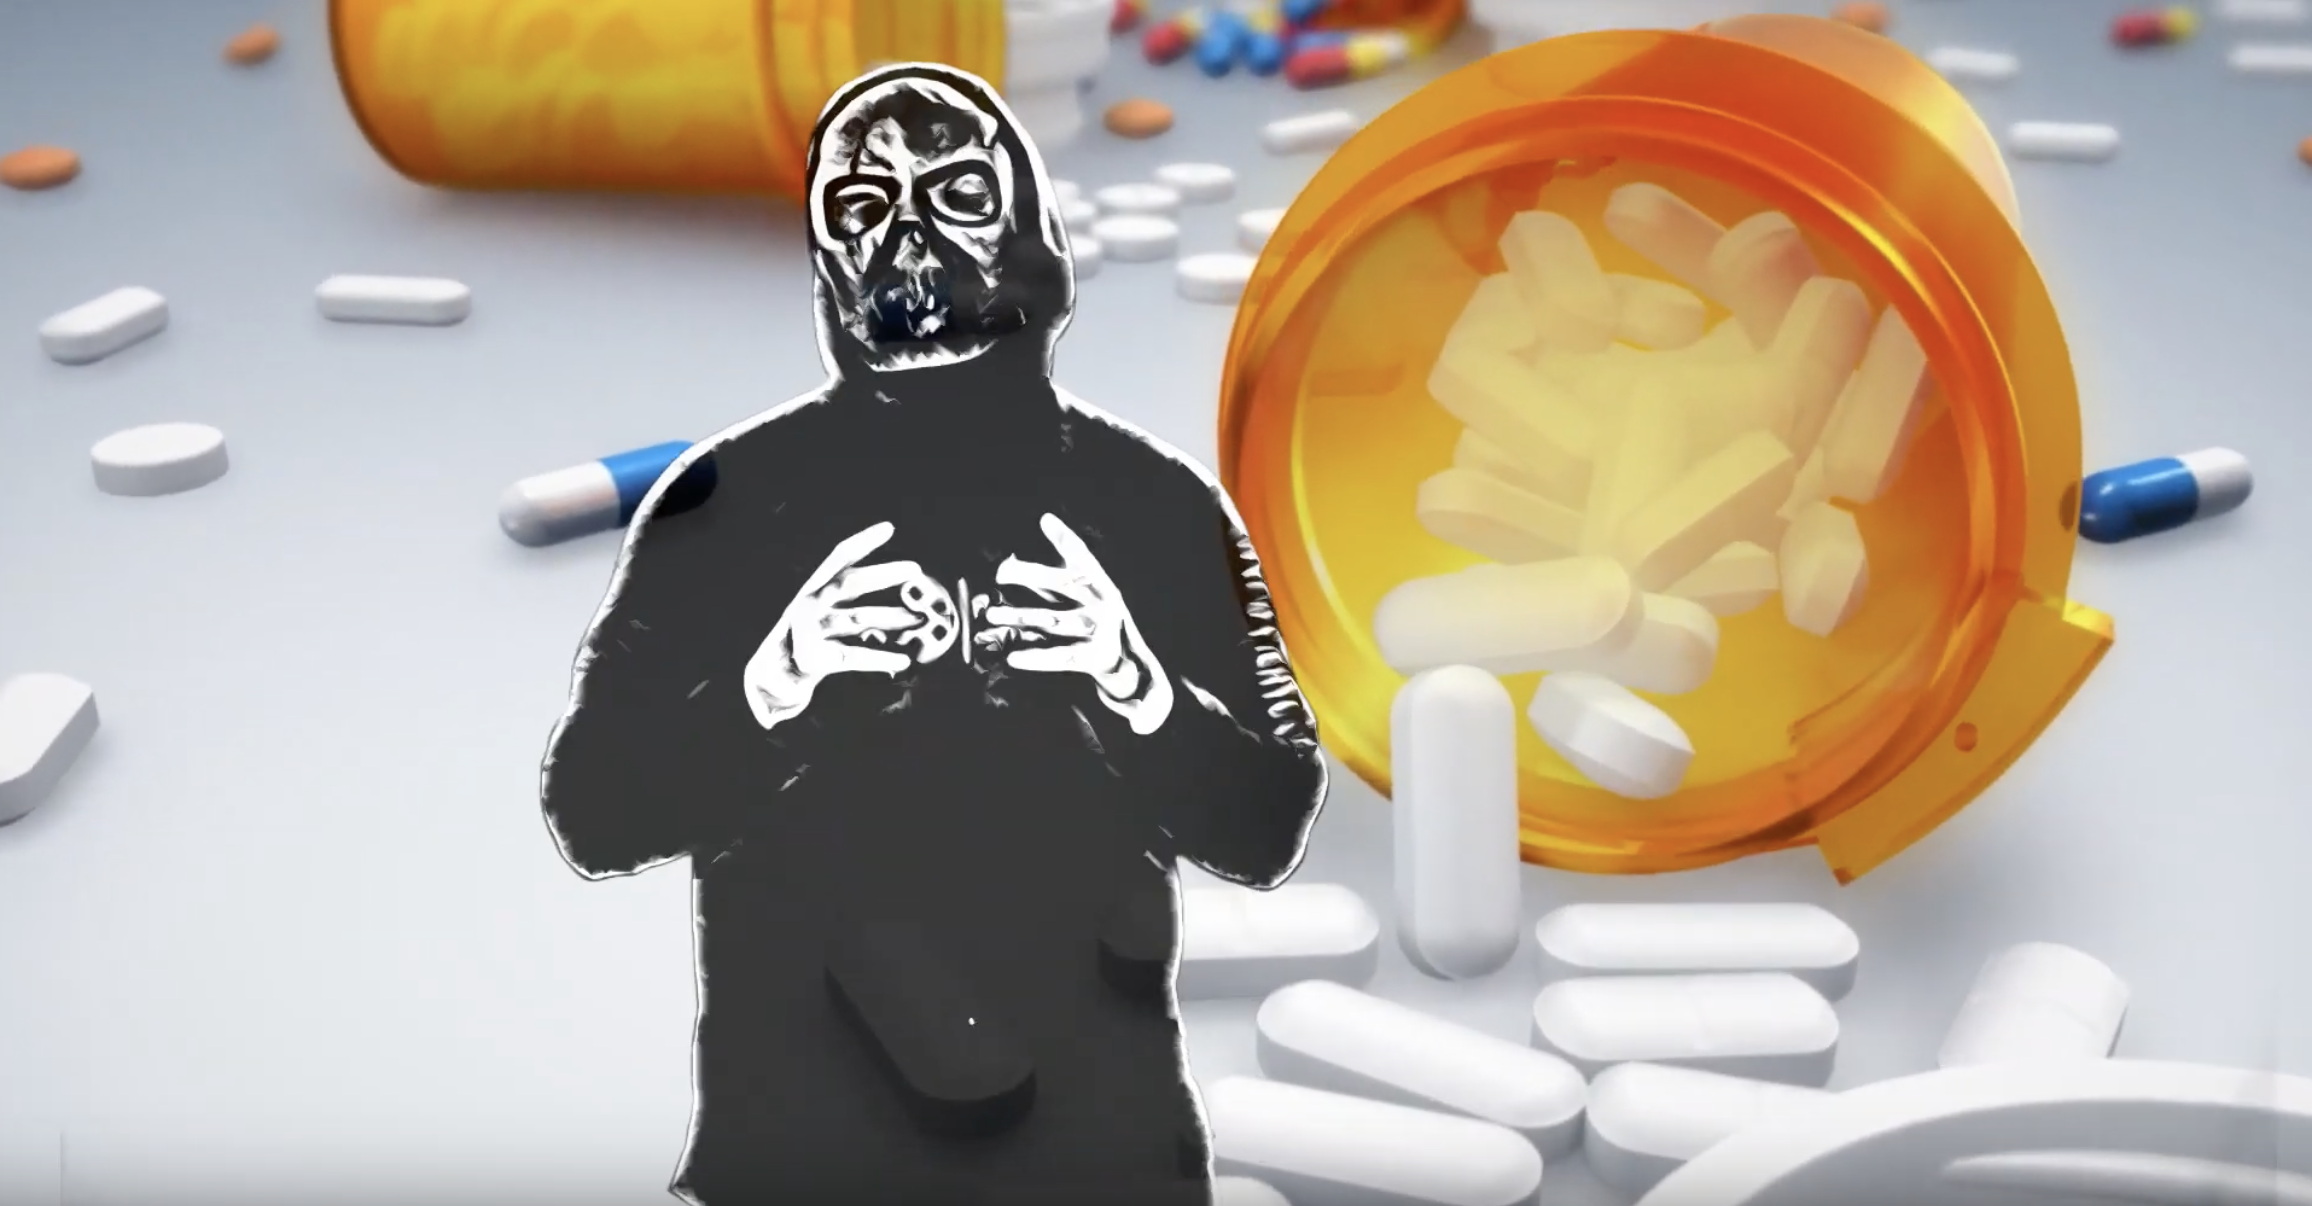 VIDEO: THE RECOVERY DRUG COMMERCIAL YOU WON'T SEE ON TV